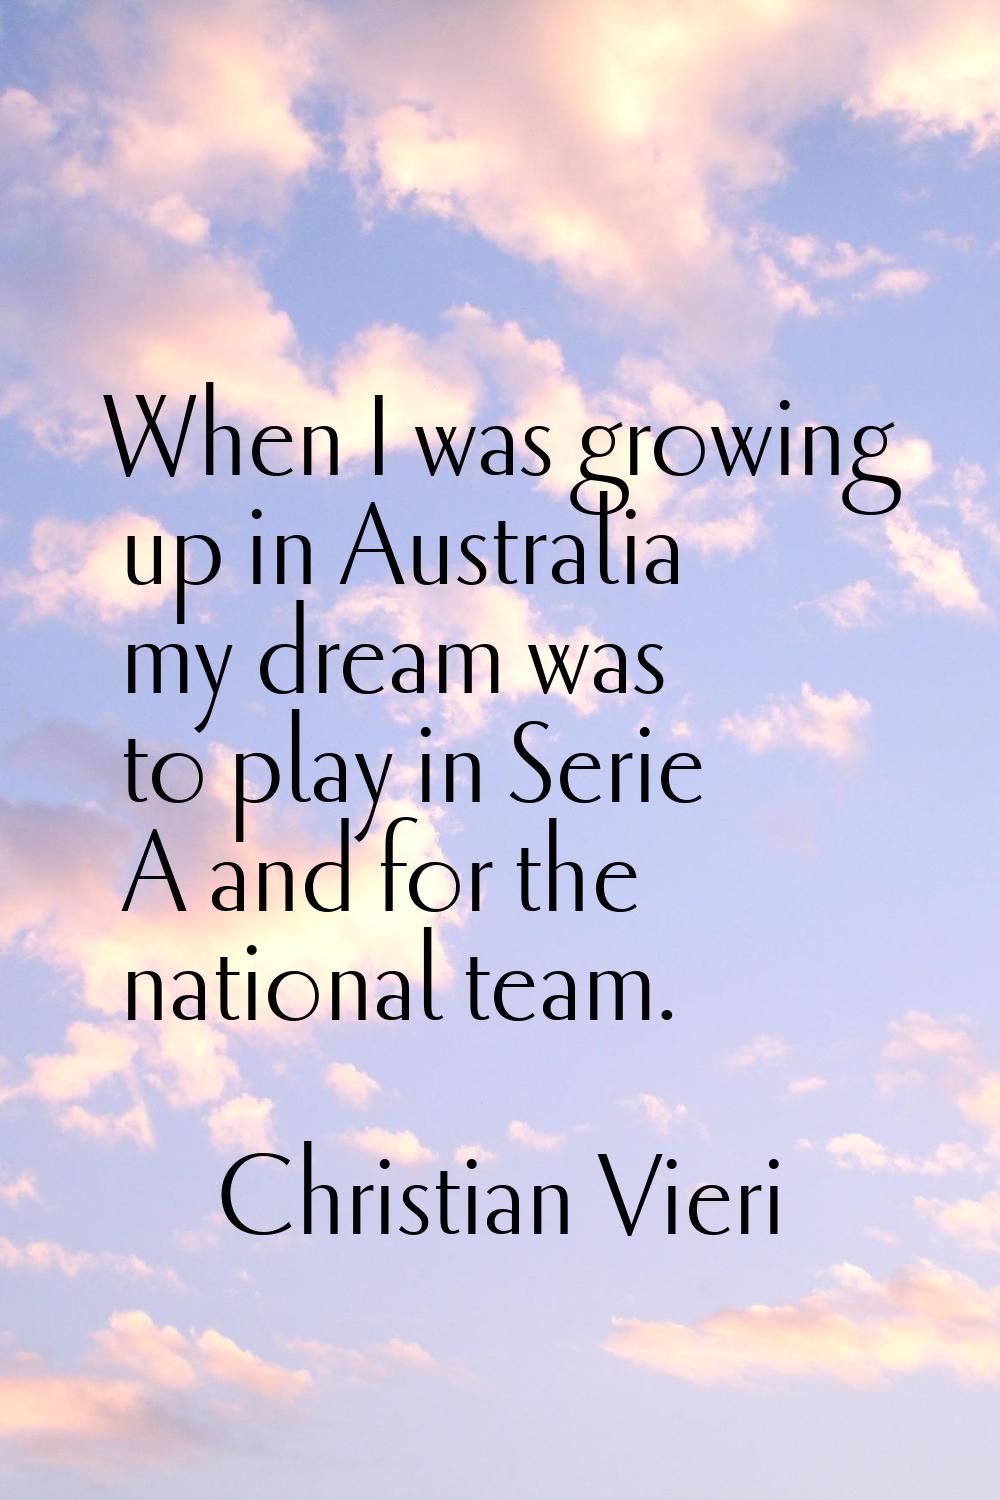 When I was growing up in Australia my dream was to play in Serie A and for the national team.